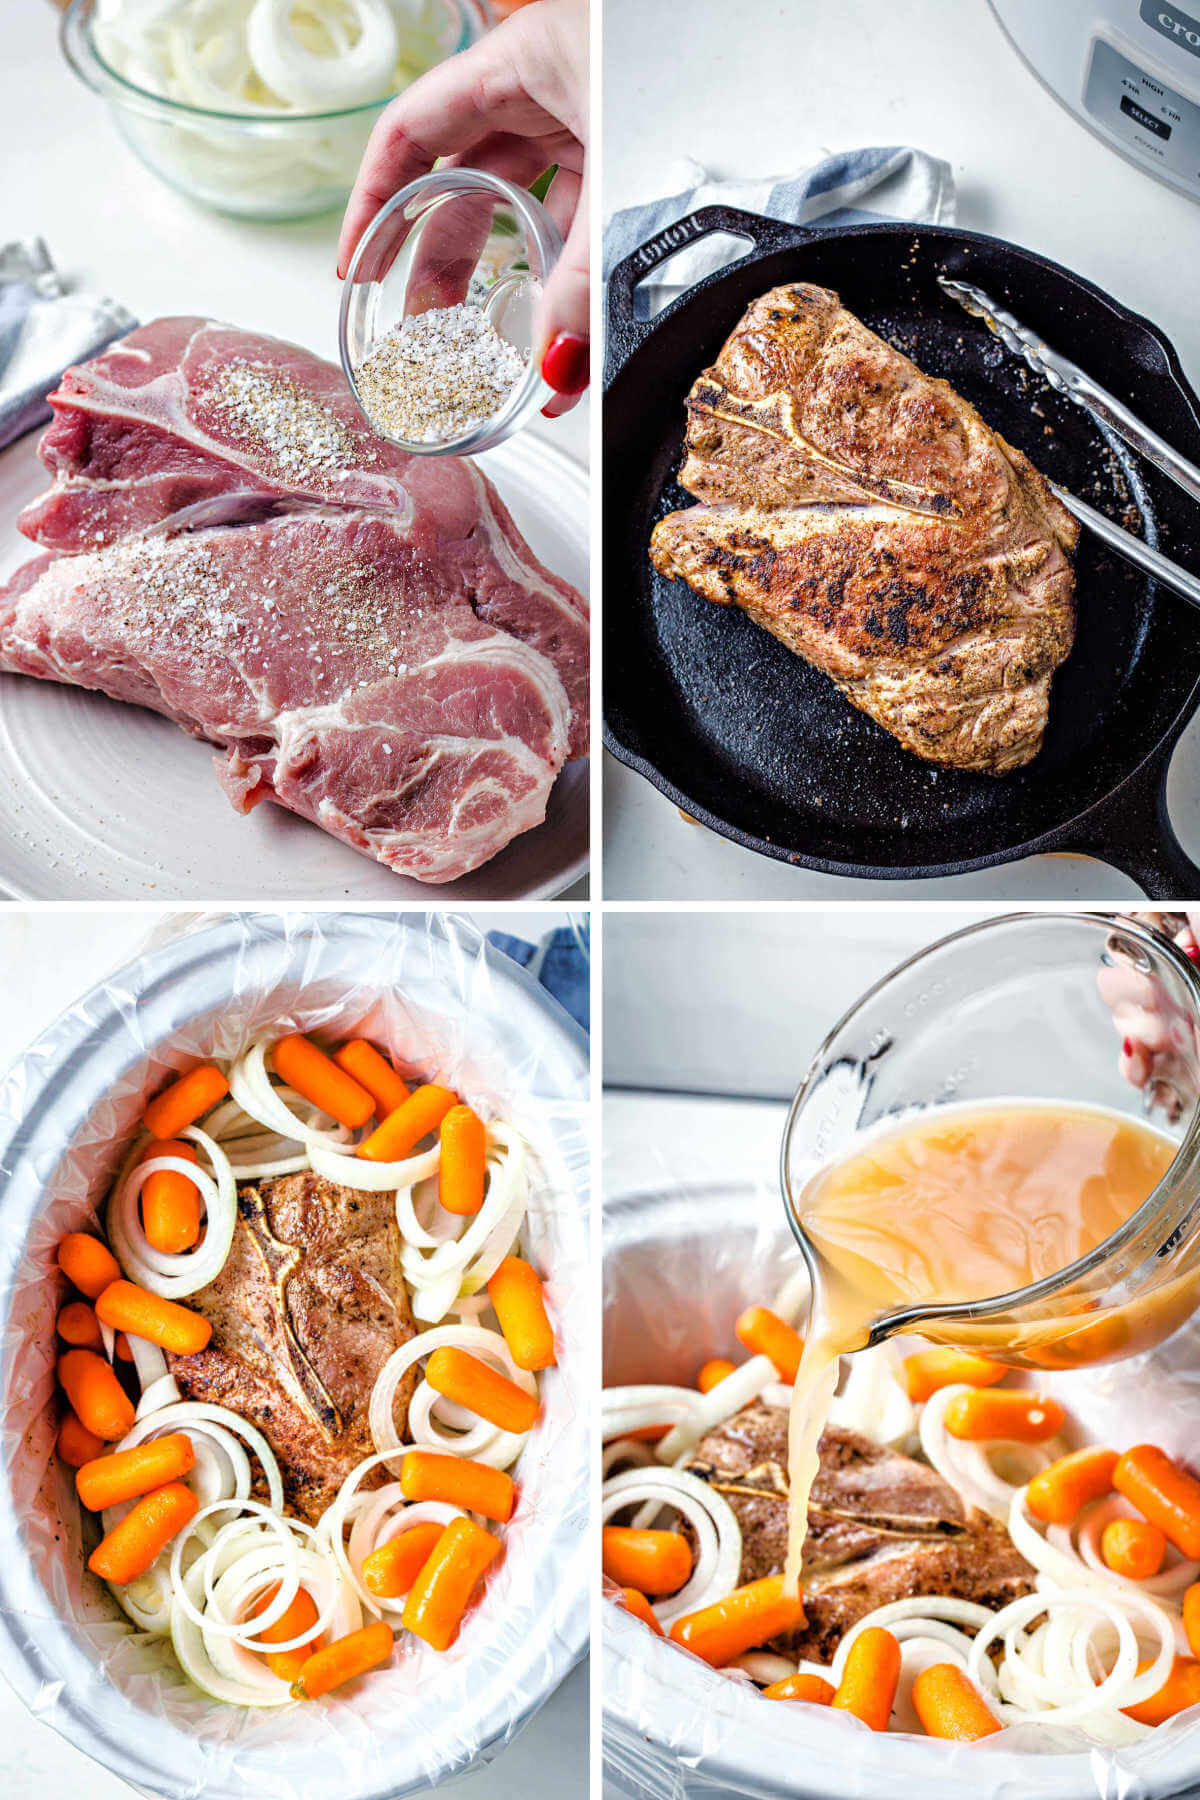 prep steps for slow cooker pork roast: season the meat; sear in cast iron; place roast in slow cooker with carrots and onions; pour in the liquid.